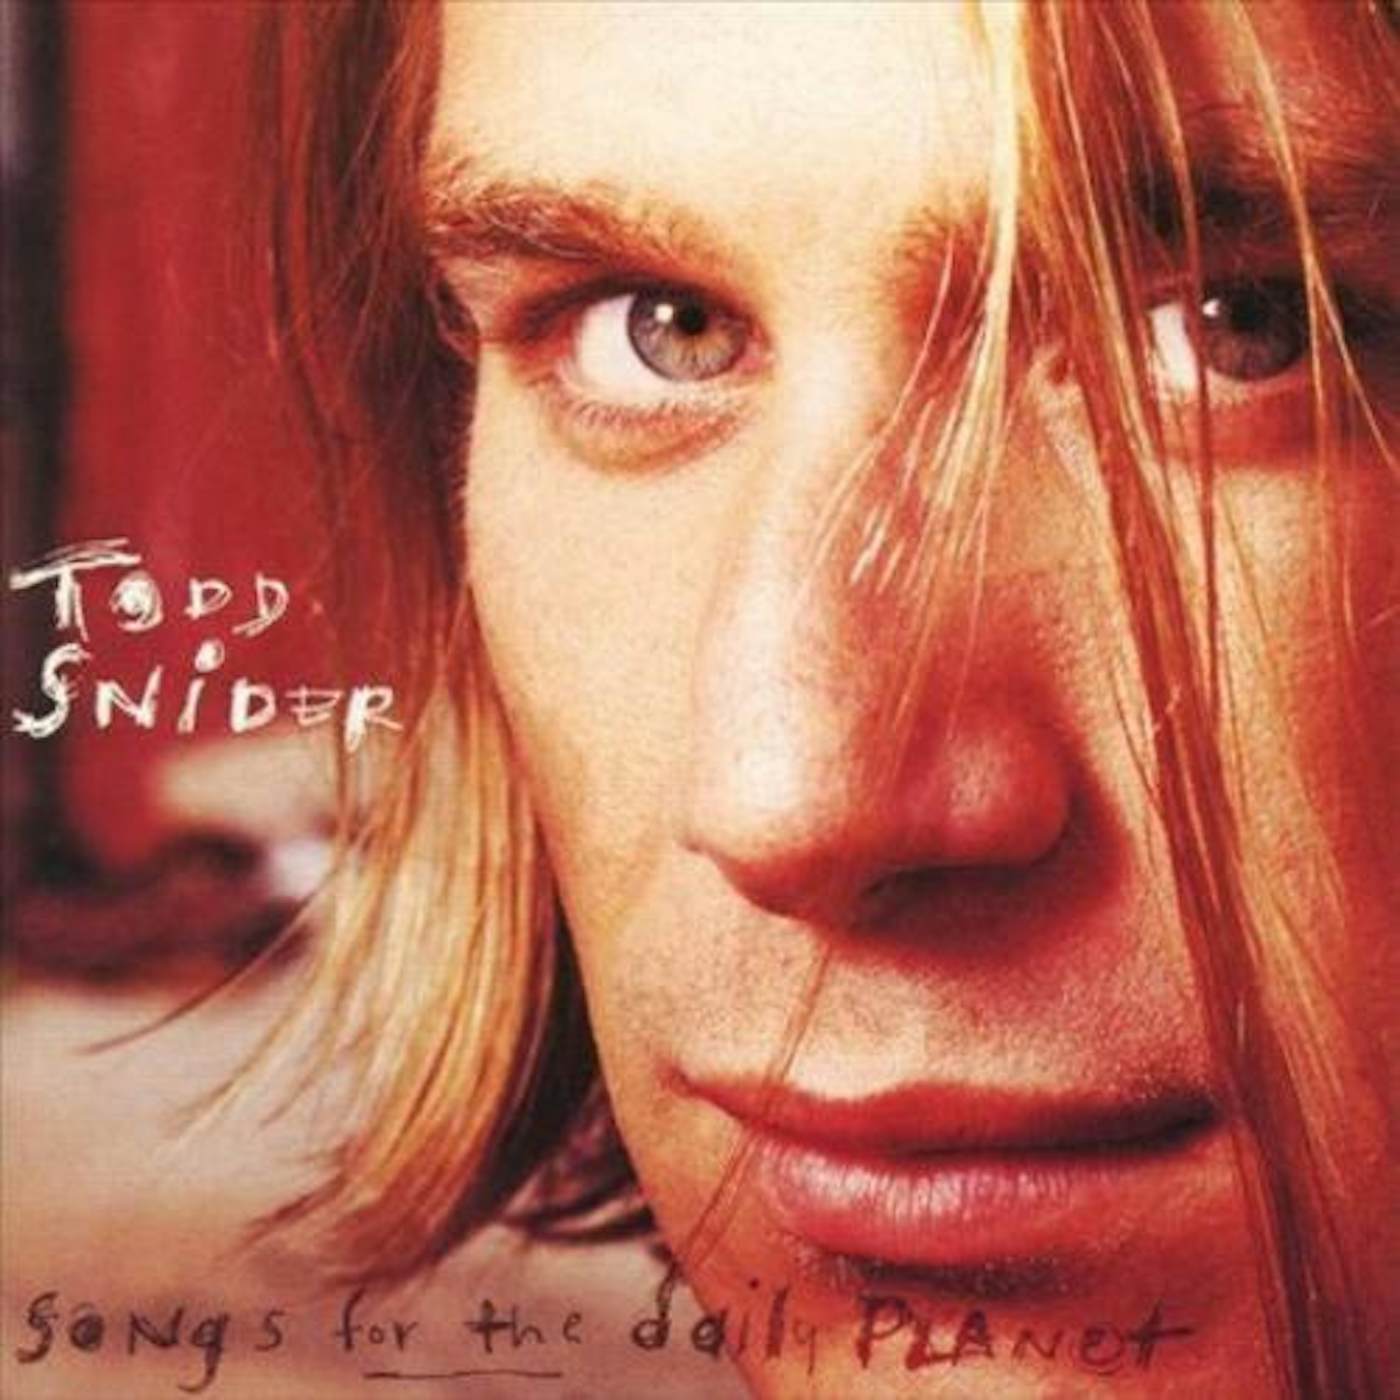 Todd Snider SONGS FOR THE DAILY PLANET (TRANSLUCENT GREEN VINYL) Vinyl Record